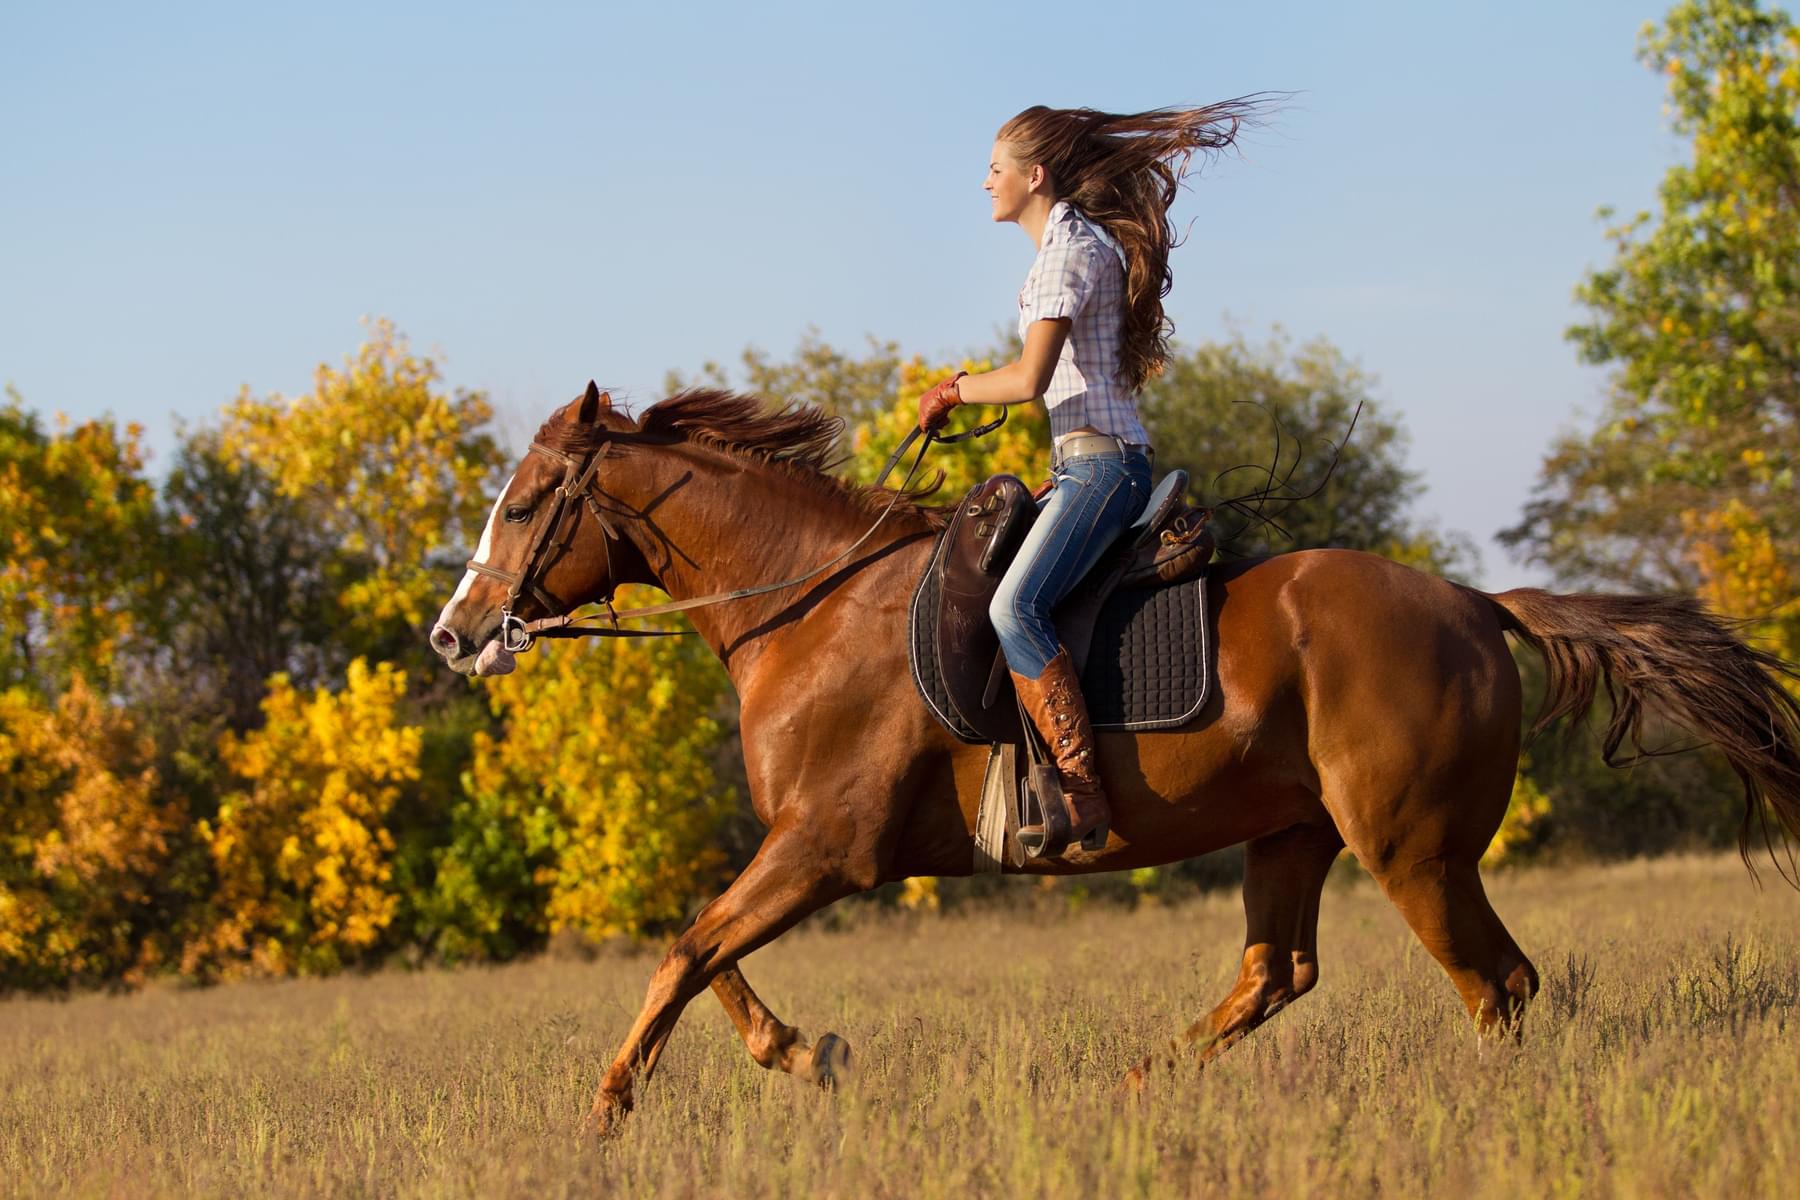 Why Horse Riding is Popular in Dubai?